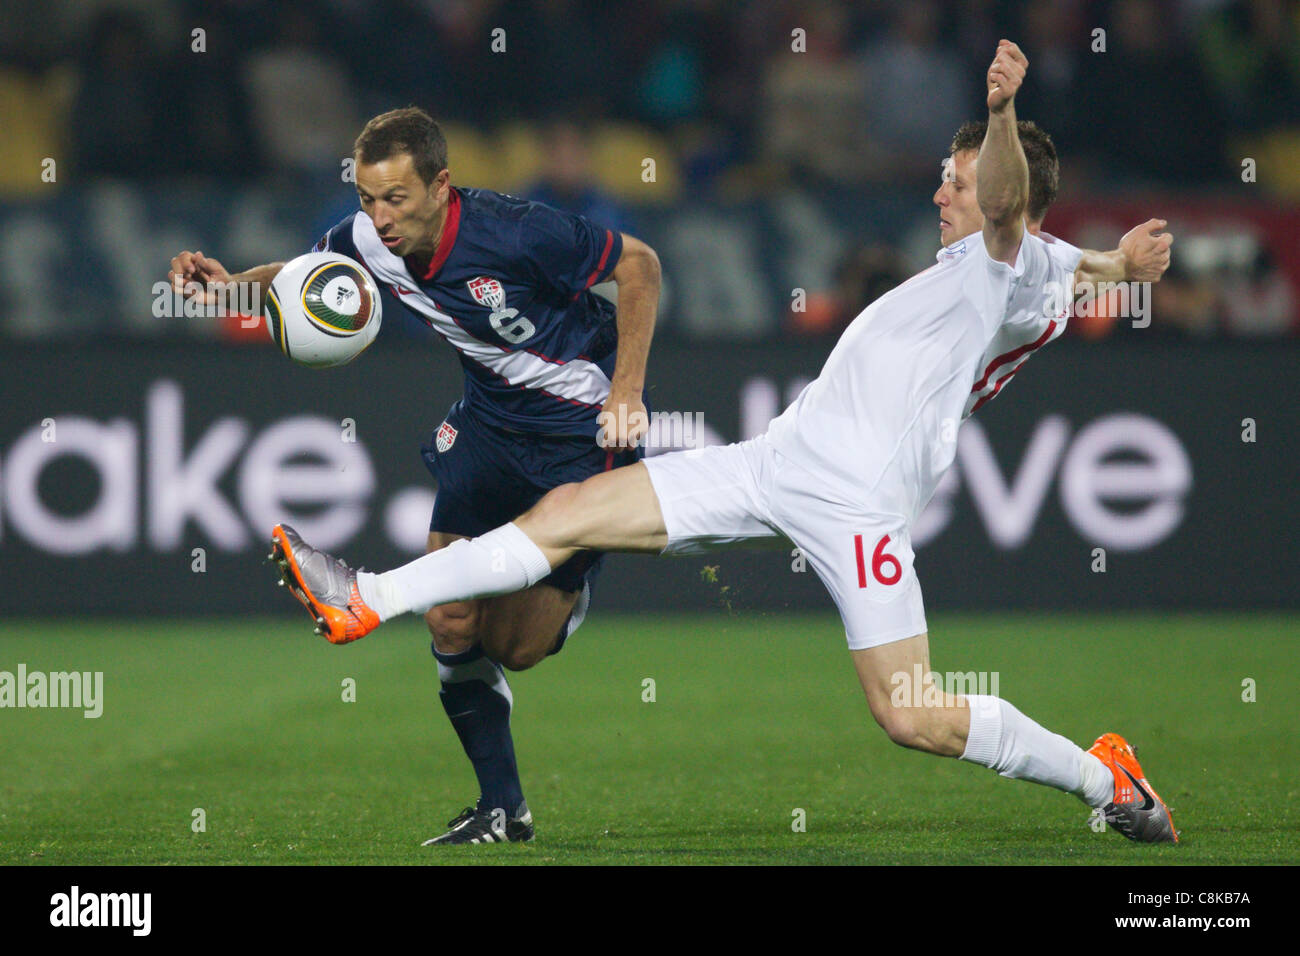 James Milner of England (R) stretches for the ball against Steve Cherundolo of the USA (L) during a 2010 FIFA World Cup match. Stock Photo